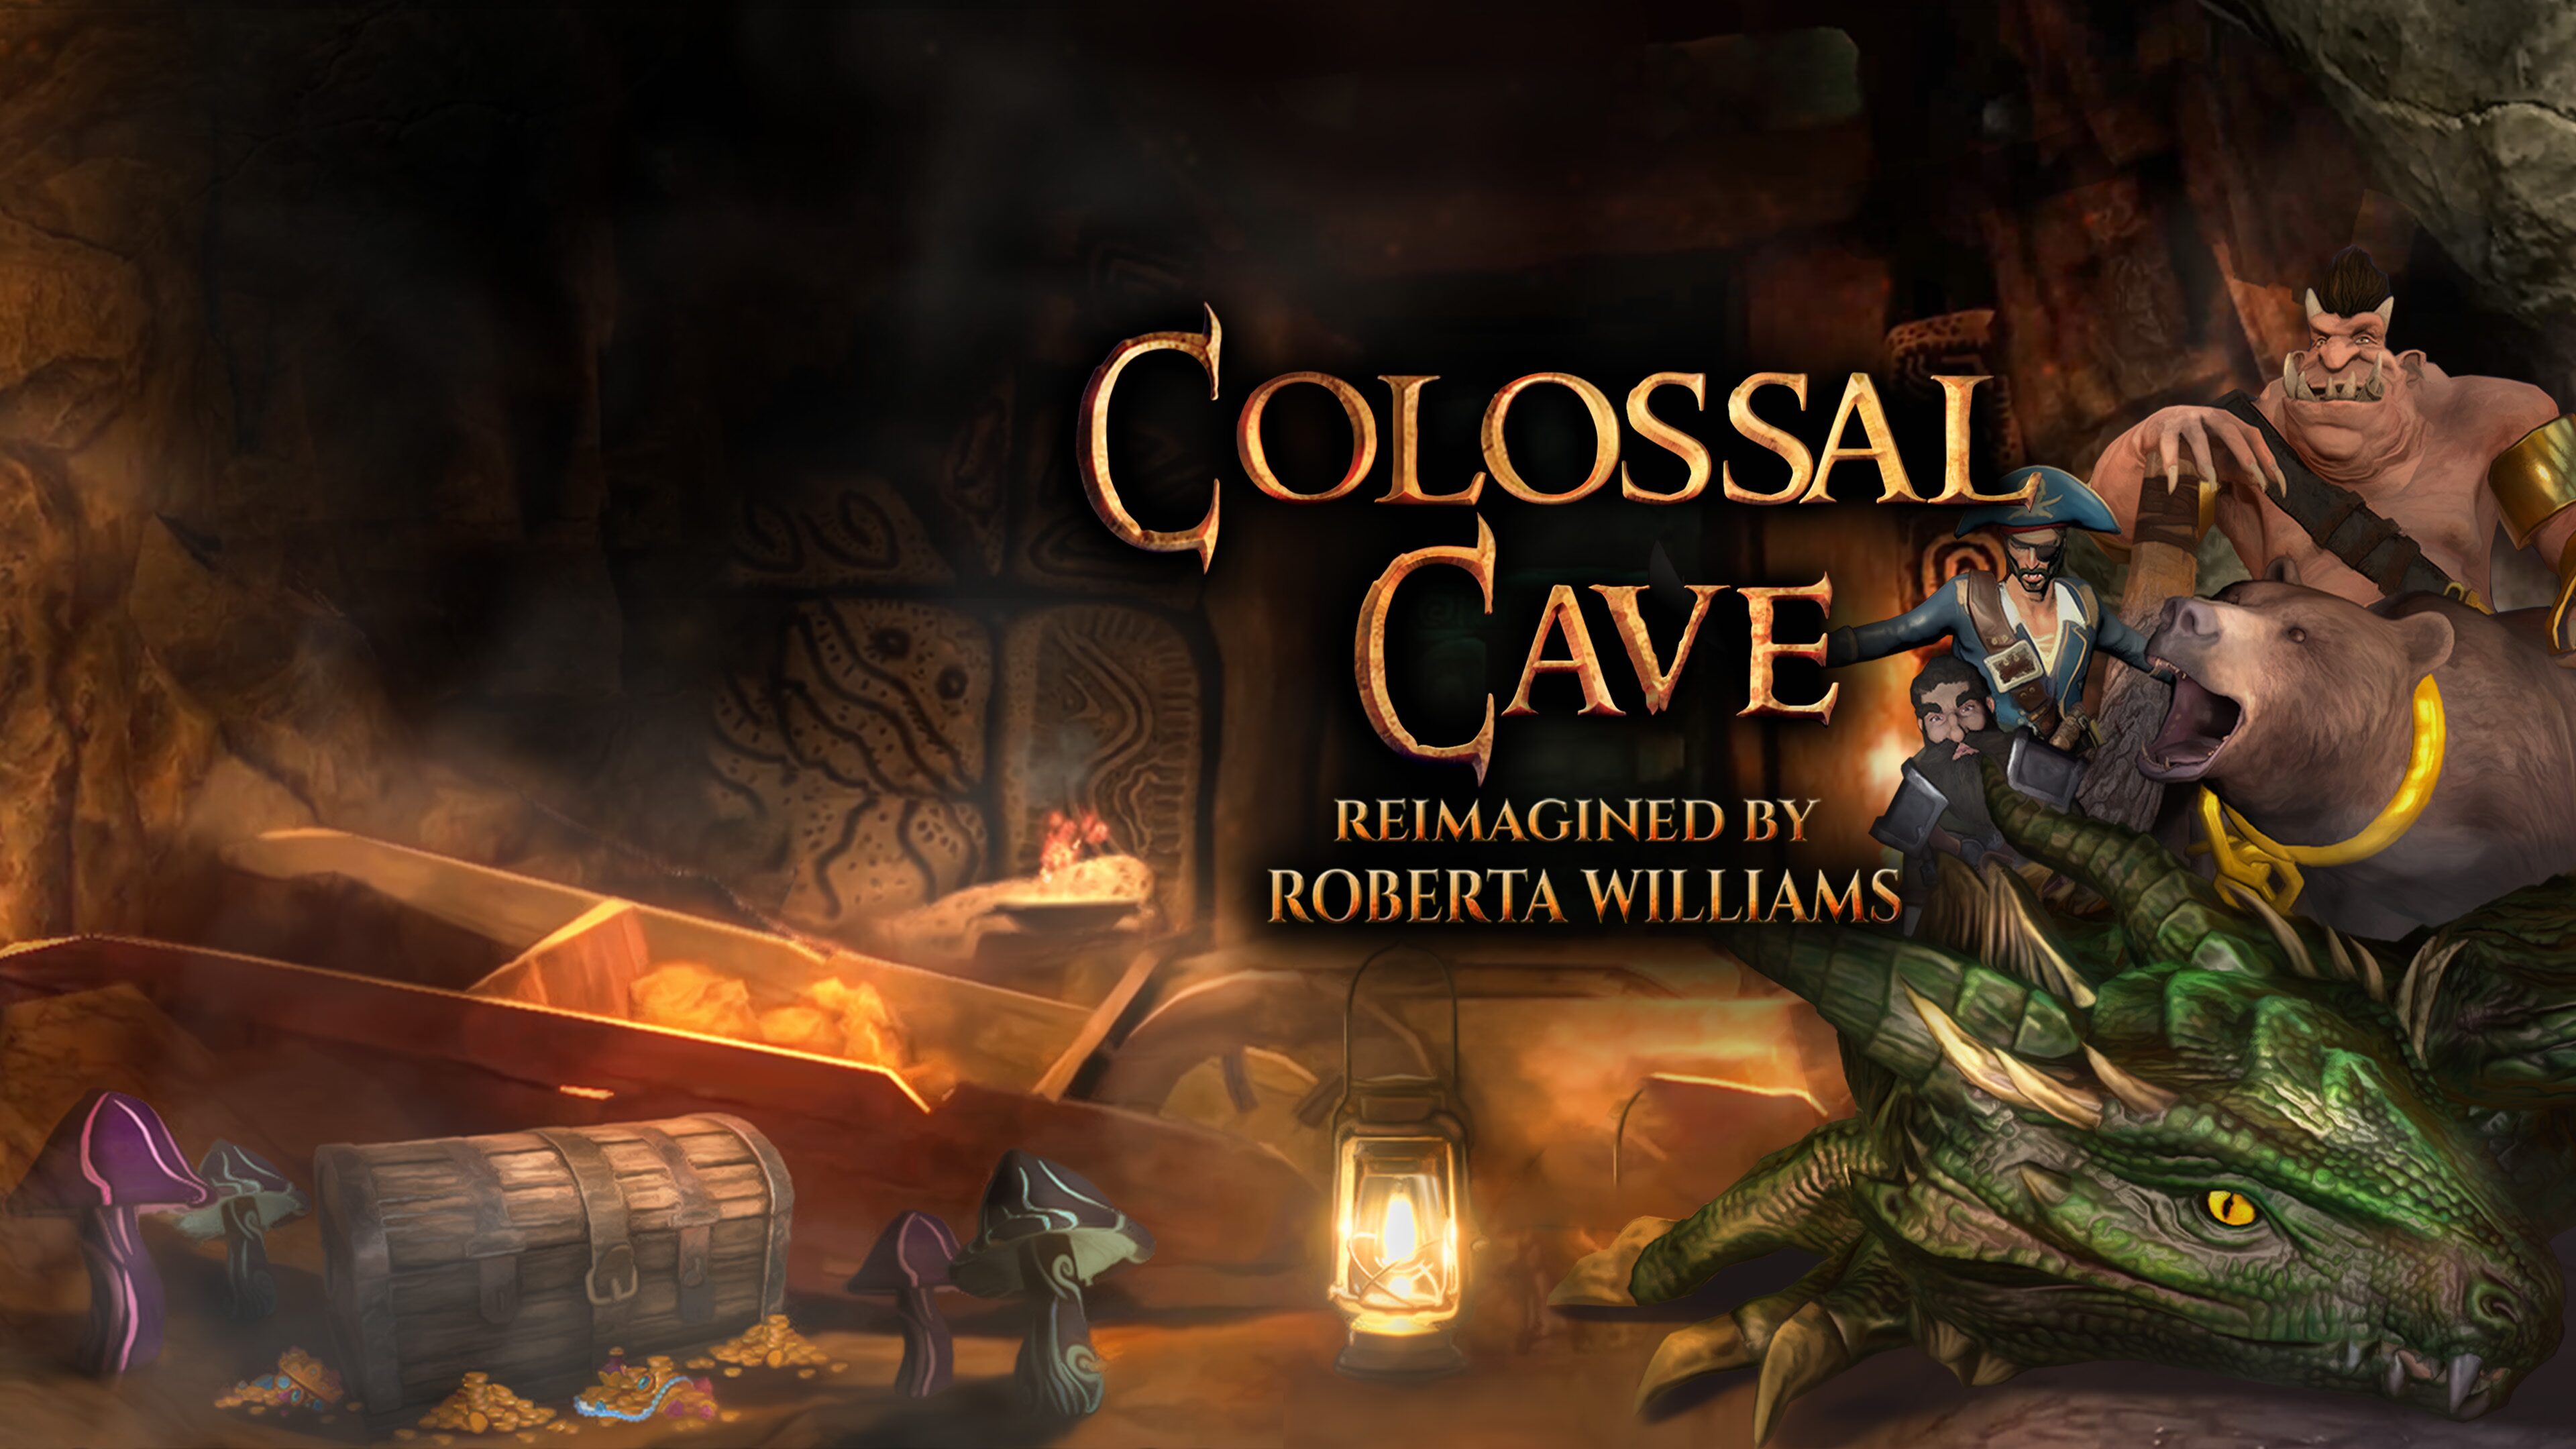 Colossal Cave Reimagined by Roberta Williams